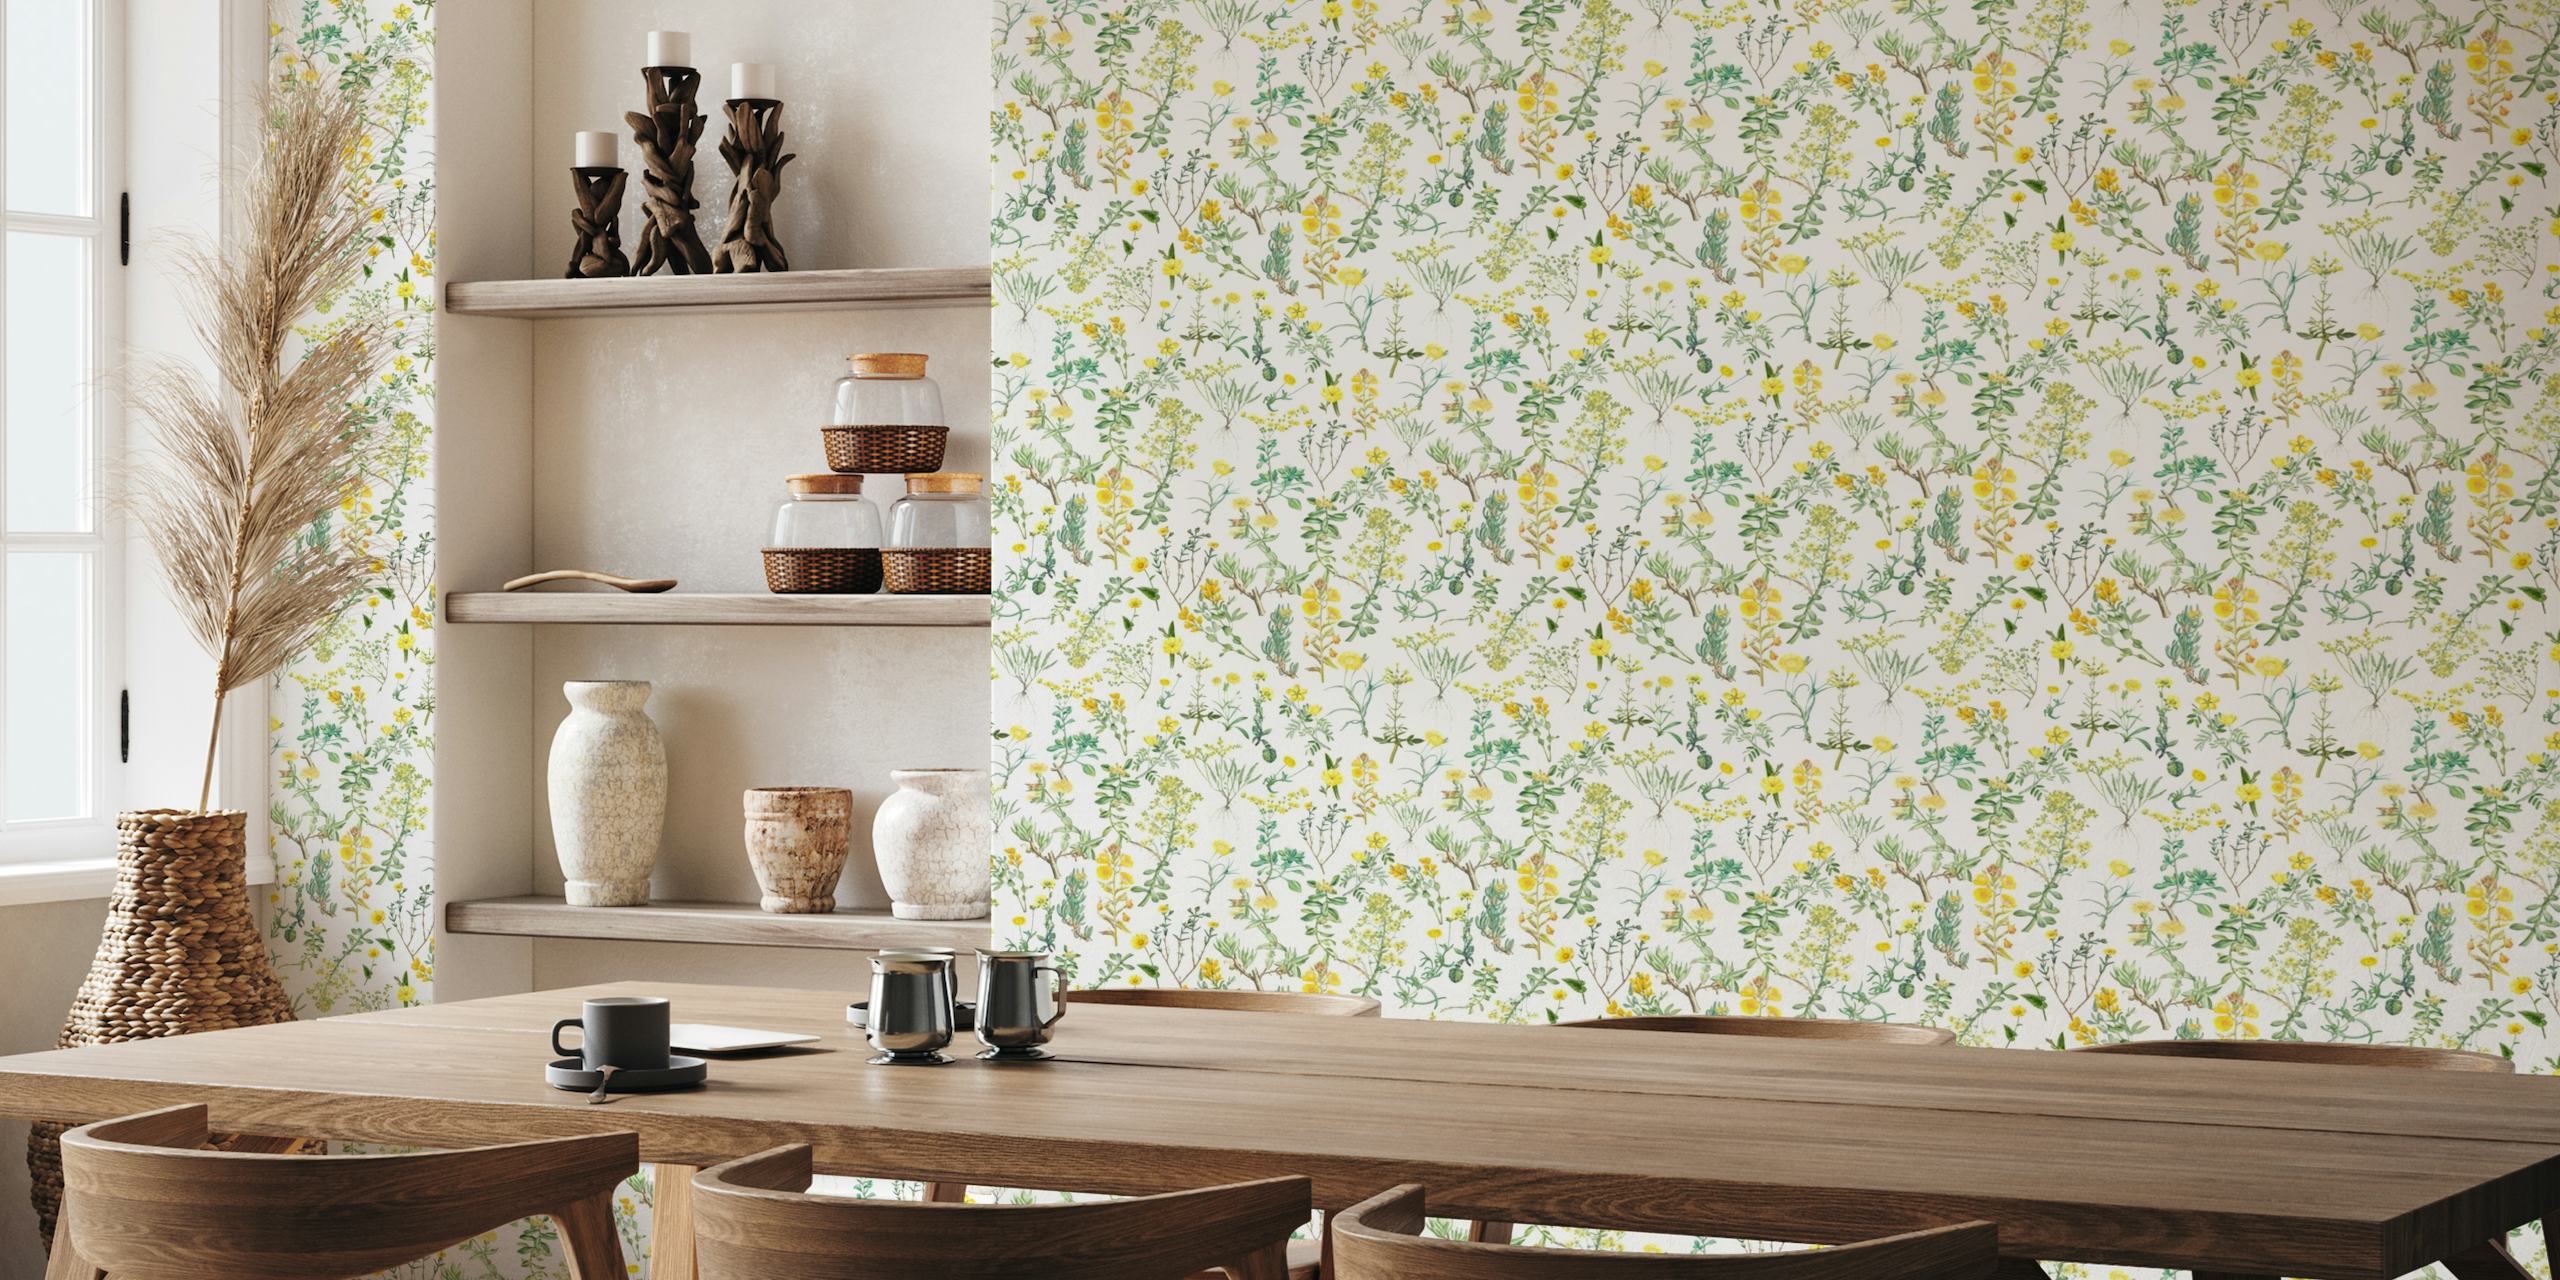 Yellow wildflowers and herbs pattern on wallpaper representing a vintage fall forest scene